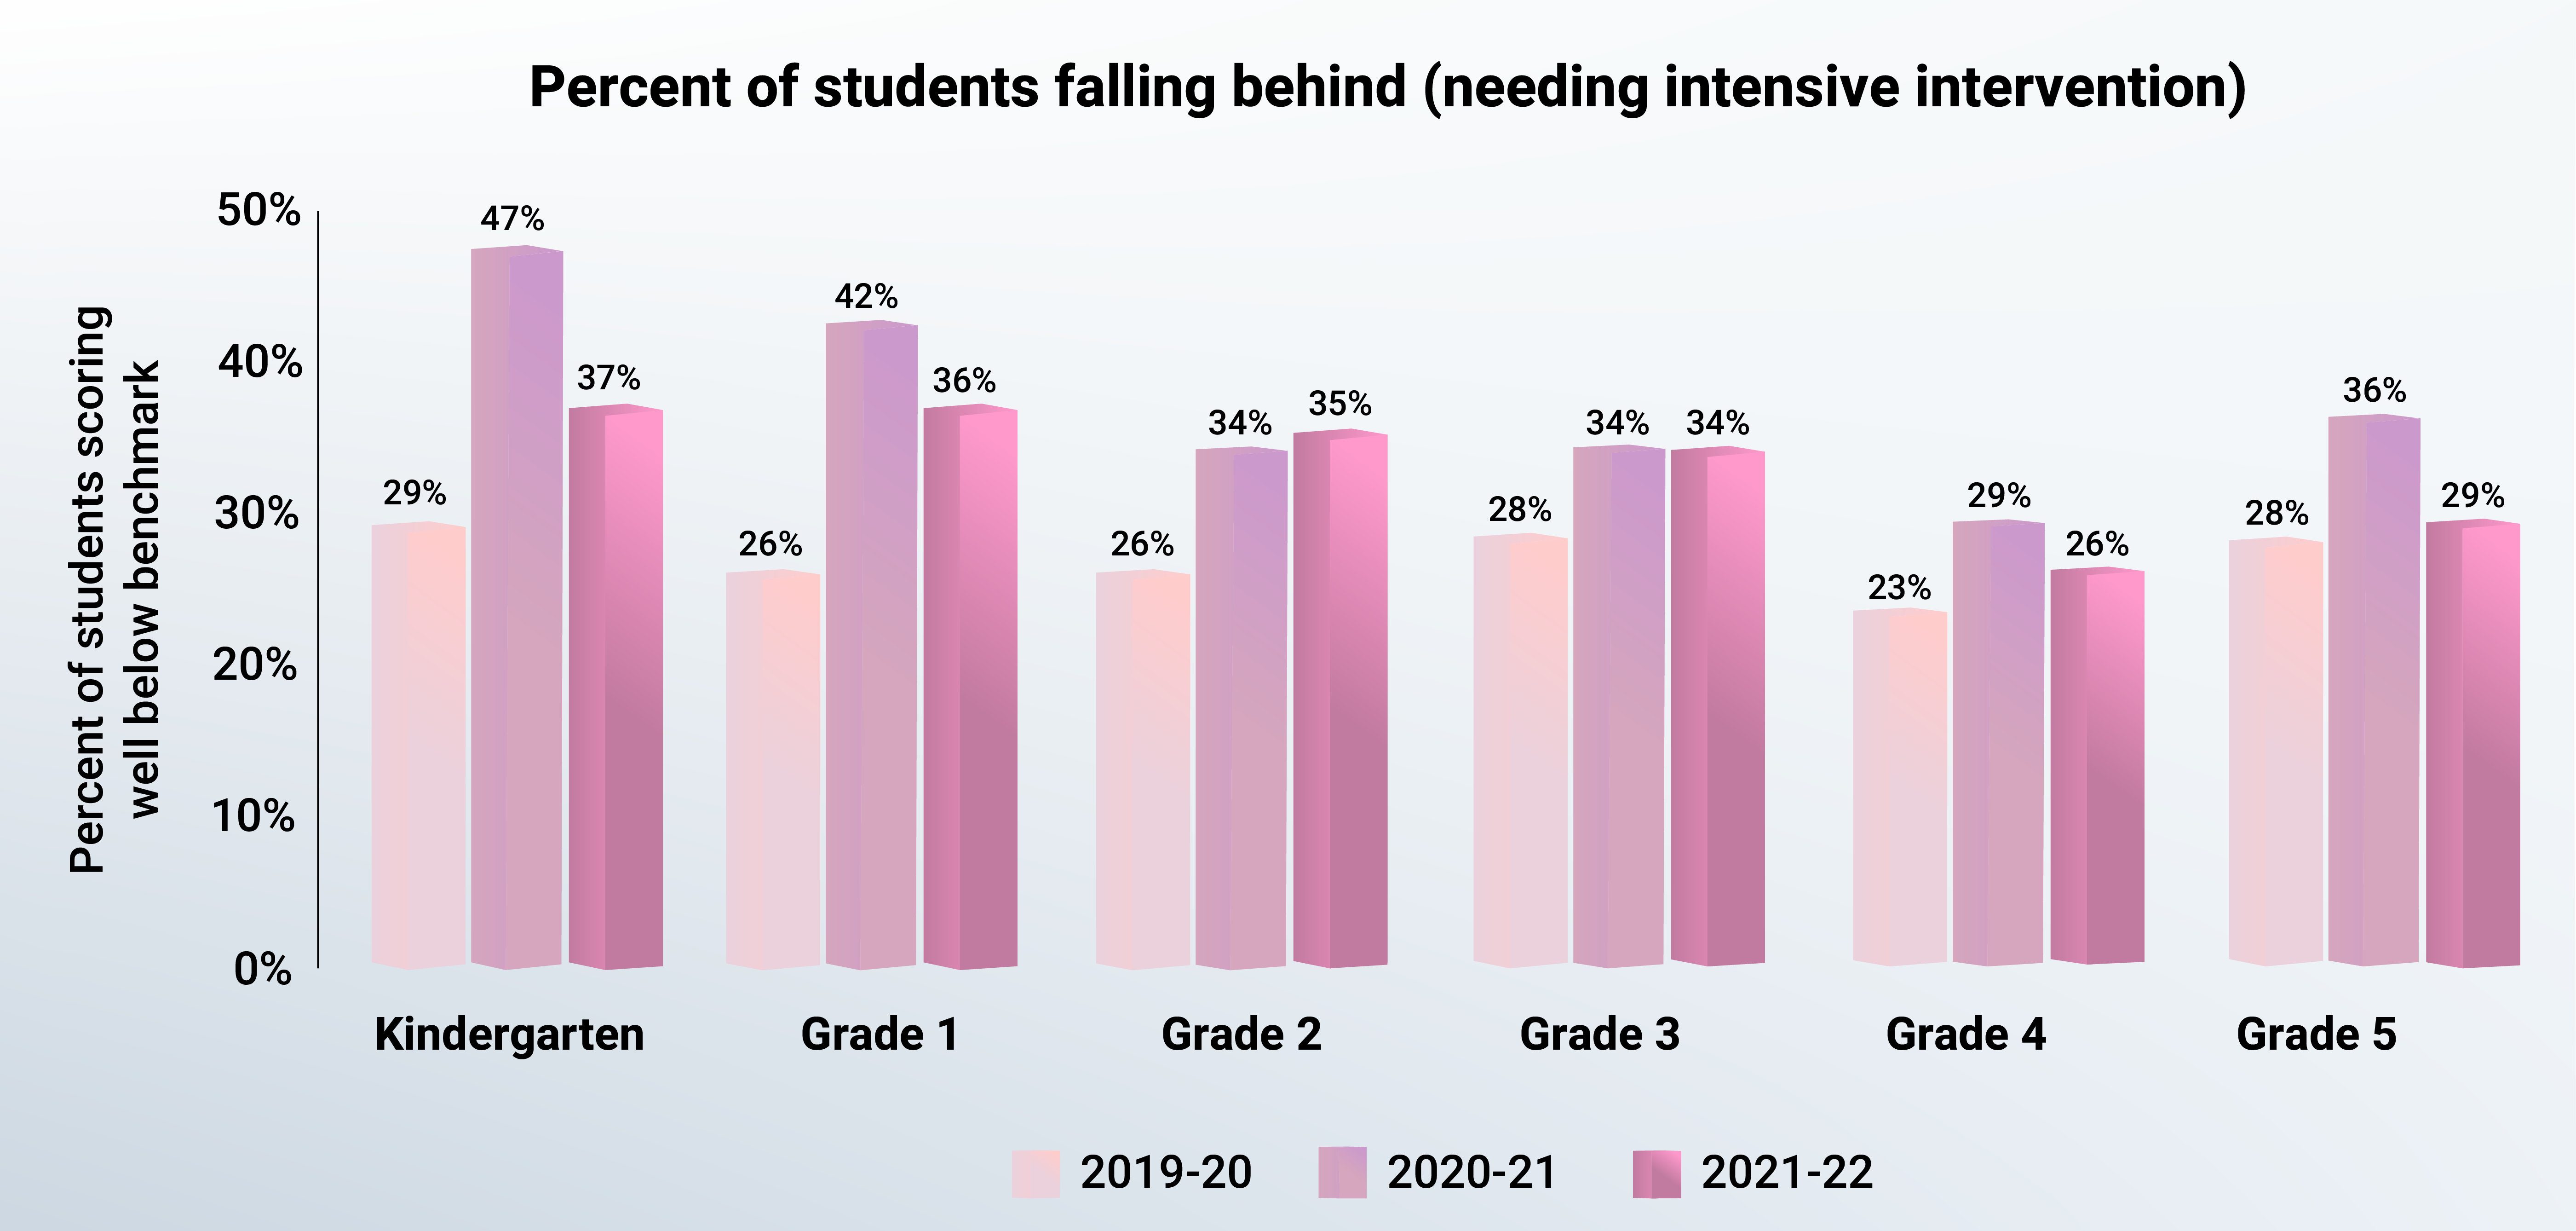 Percent of students falling behind in education sector